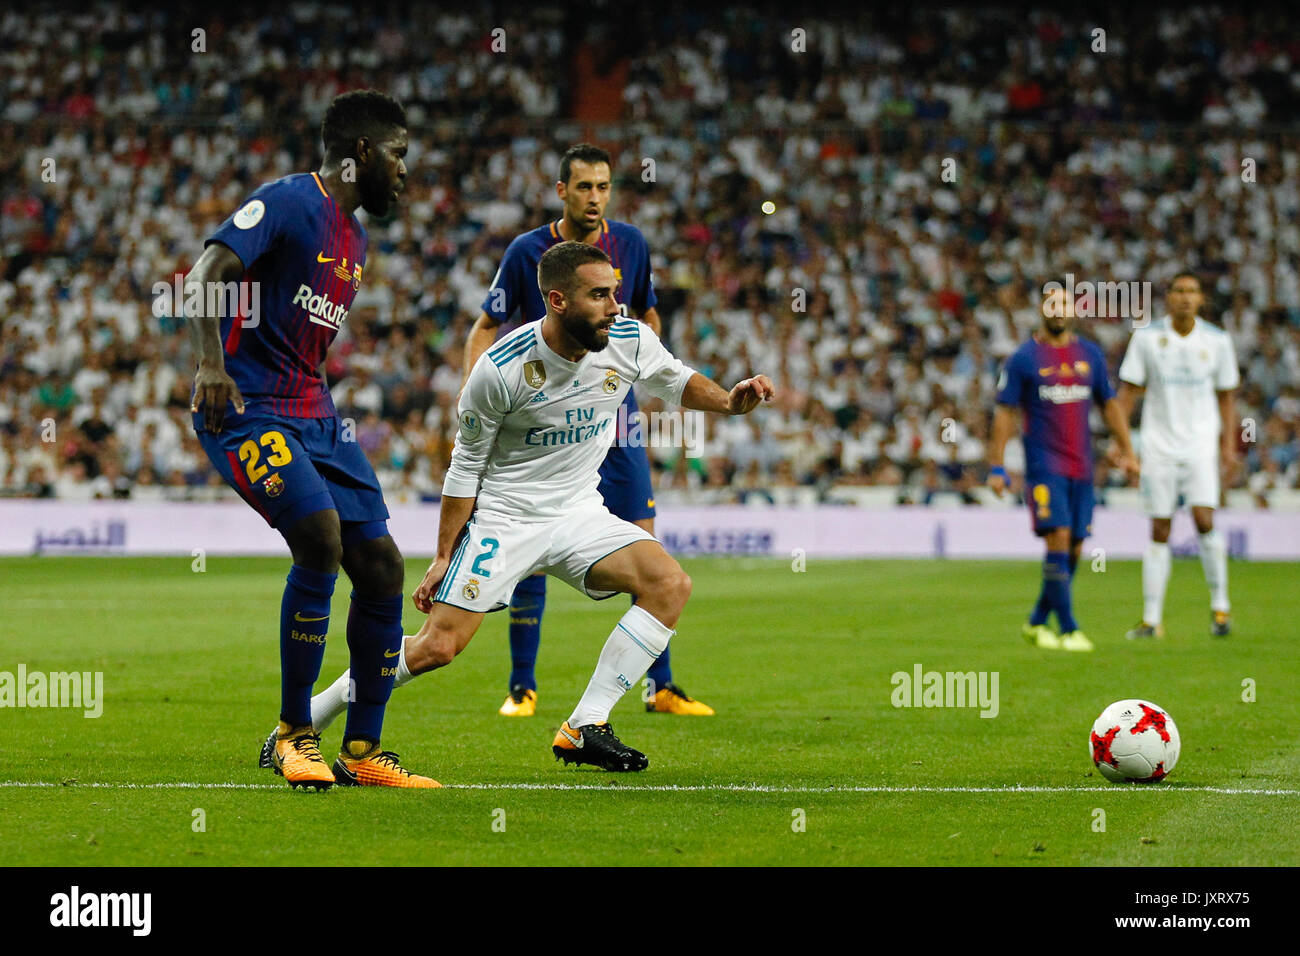 Madrid, Spain. 16th Aug, 2017. Samuel Umtiti (23) FC Barcelona's player. Daniel Carvajal Ramos (2) Real Madrid's player.SPANISH SUPER CUP between Real Madrid vs FC Barcelona at the Santiago Bernabeu stadium in Madrid, Spain, August 16, 2017 . Credit: Gtres Información más Comuniación on line,S.L./Alamy Live News Stock Photo